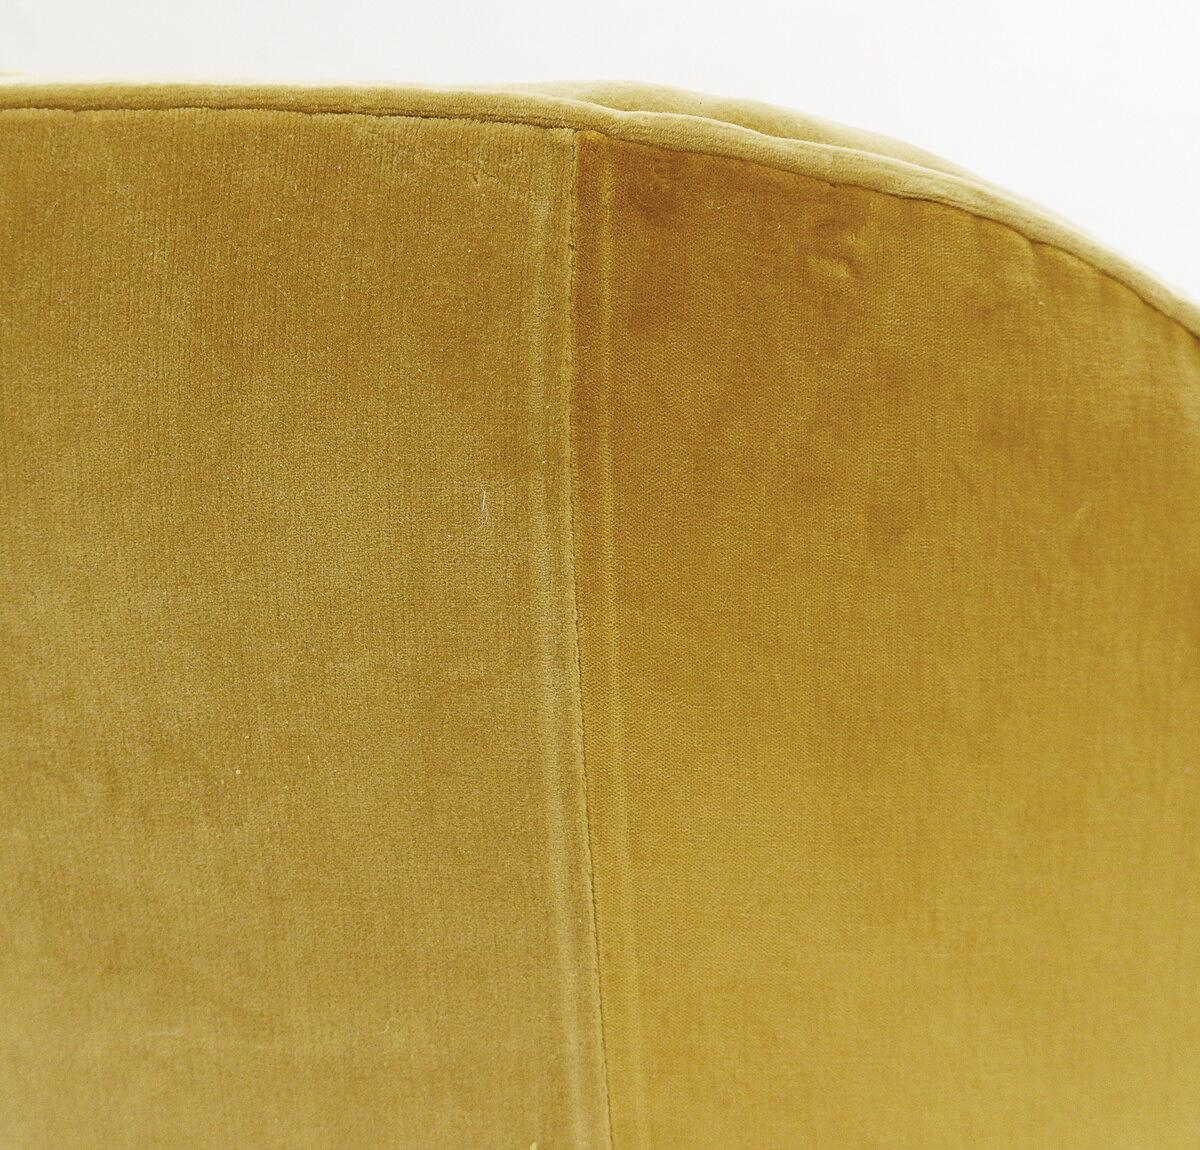  Pair of Velvet Armchairs in the style of Gio Ponti, Italy, 1950s For Sale 3